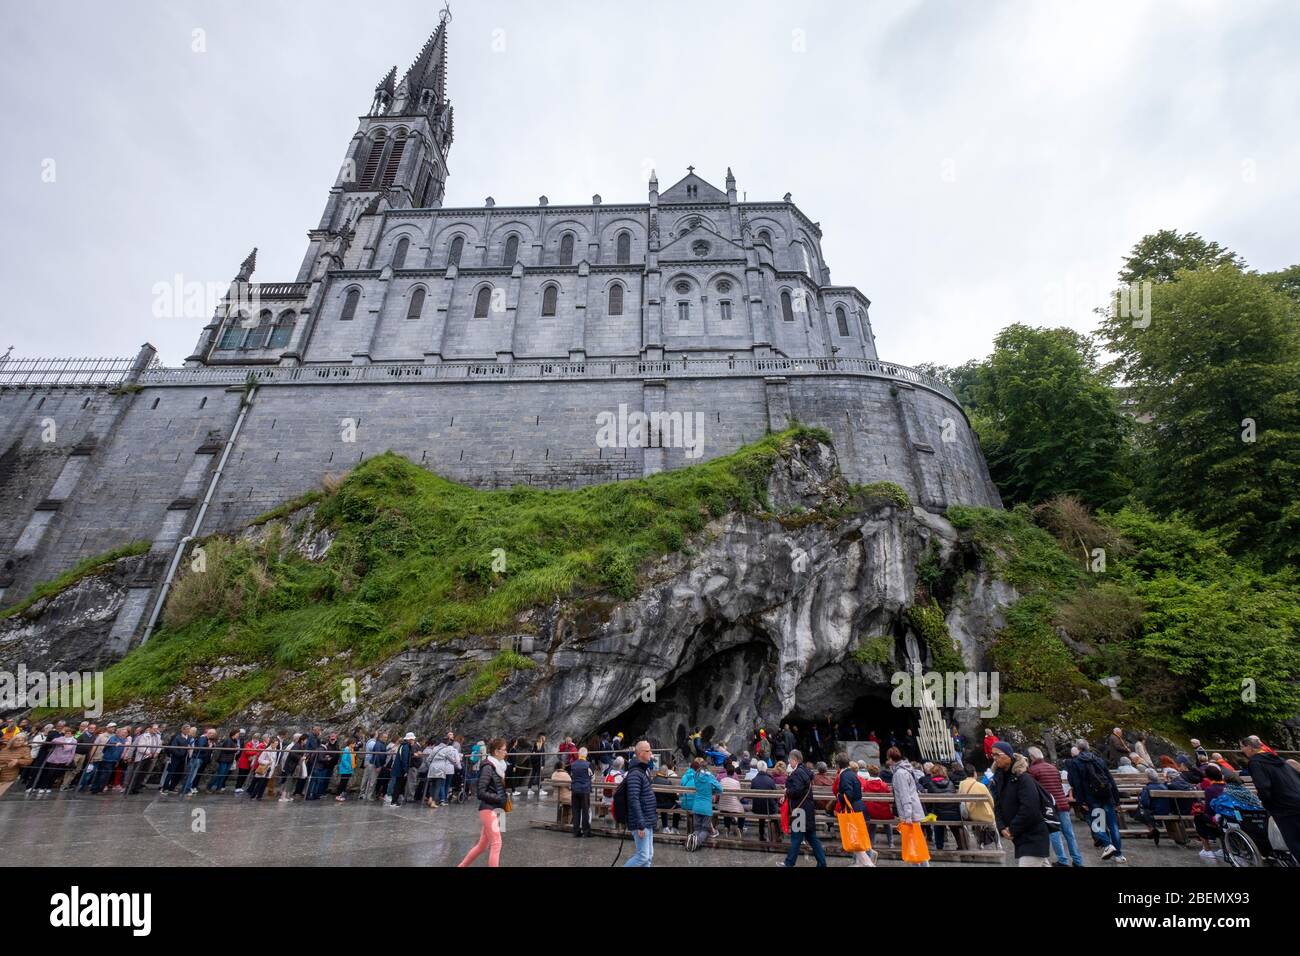 View of the Basilica of Our Lady of the Rosary constructed on top of the rock above the Grotto of Lourdes, France, Europe Stock Photo